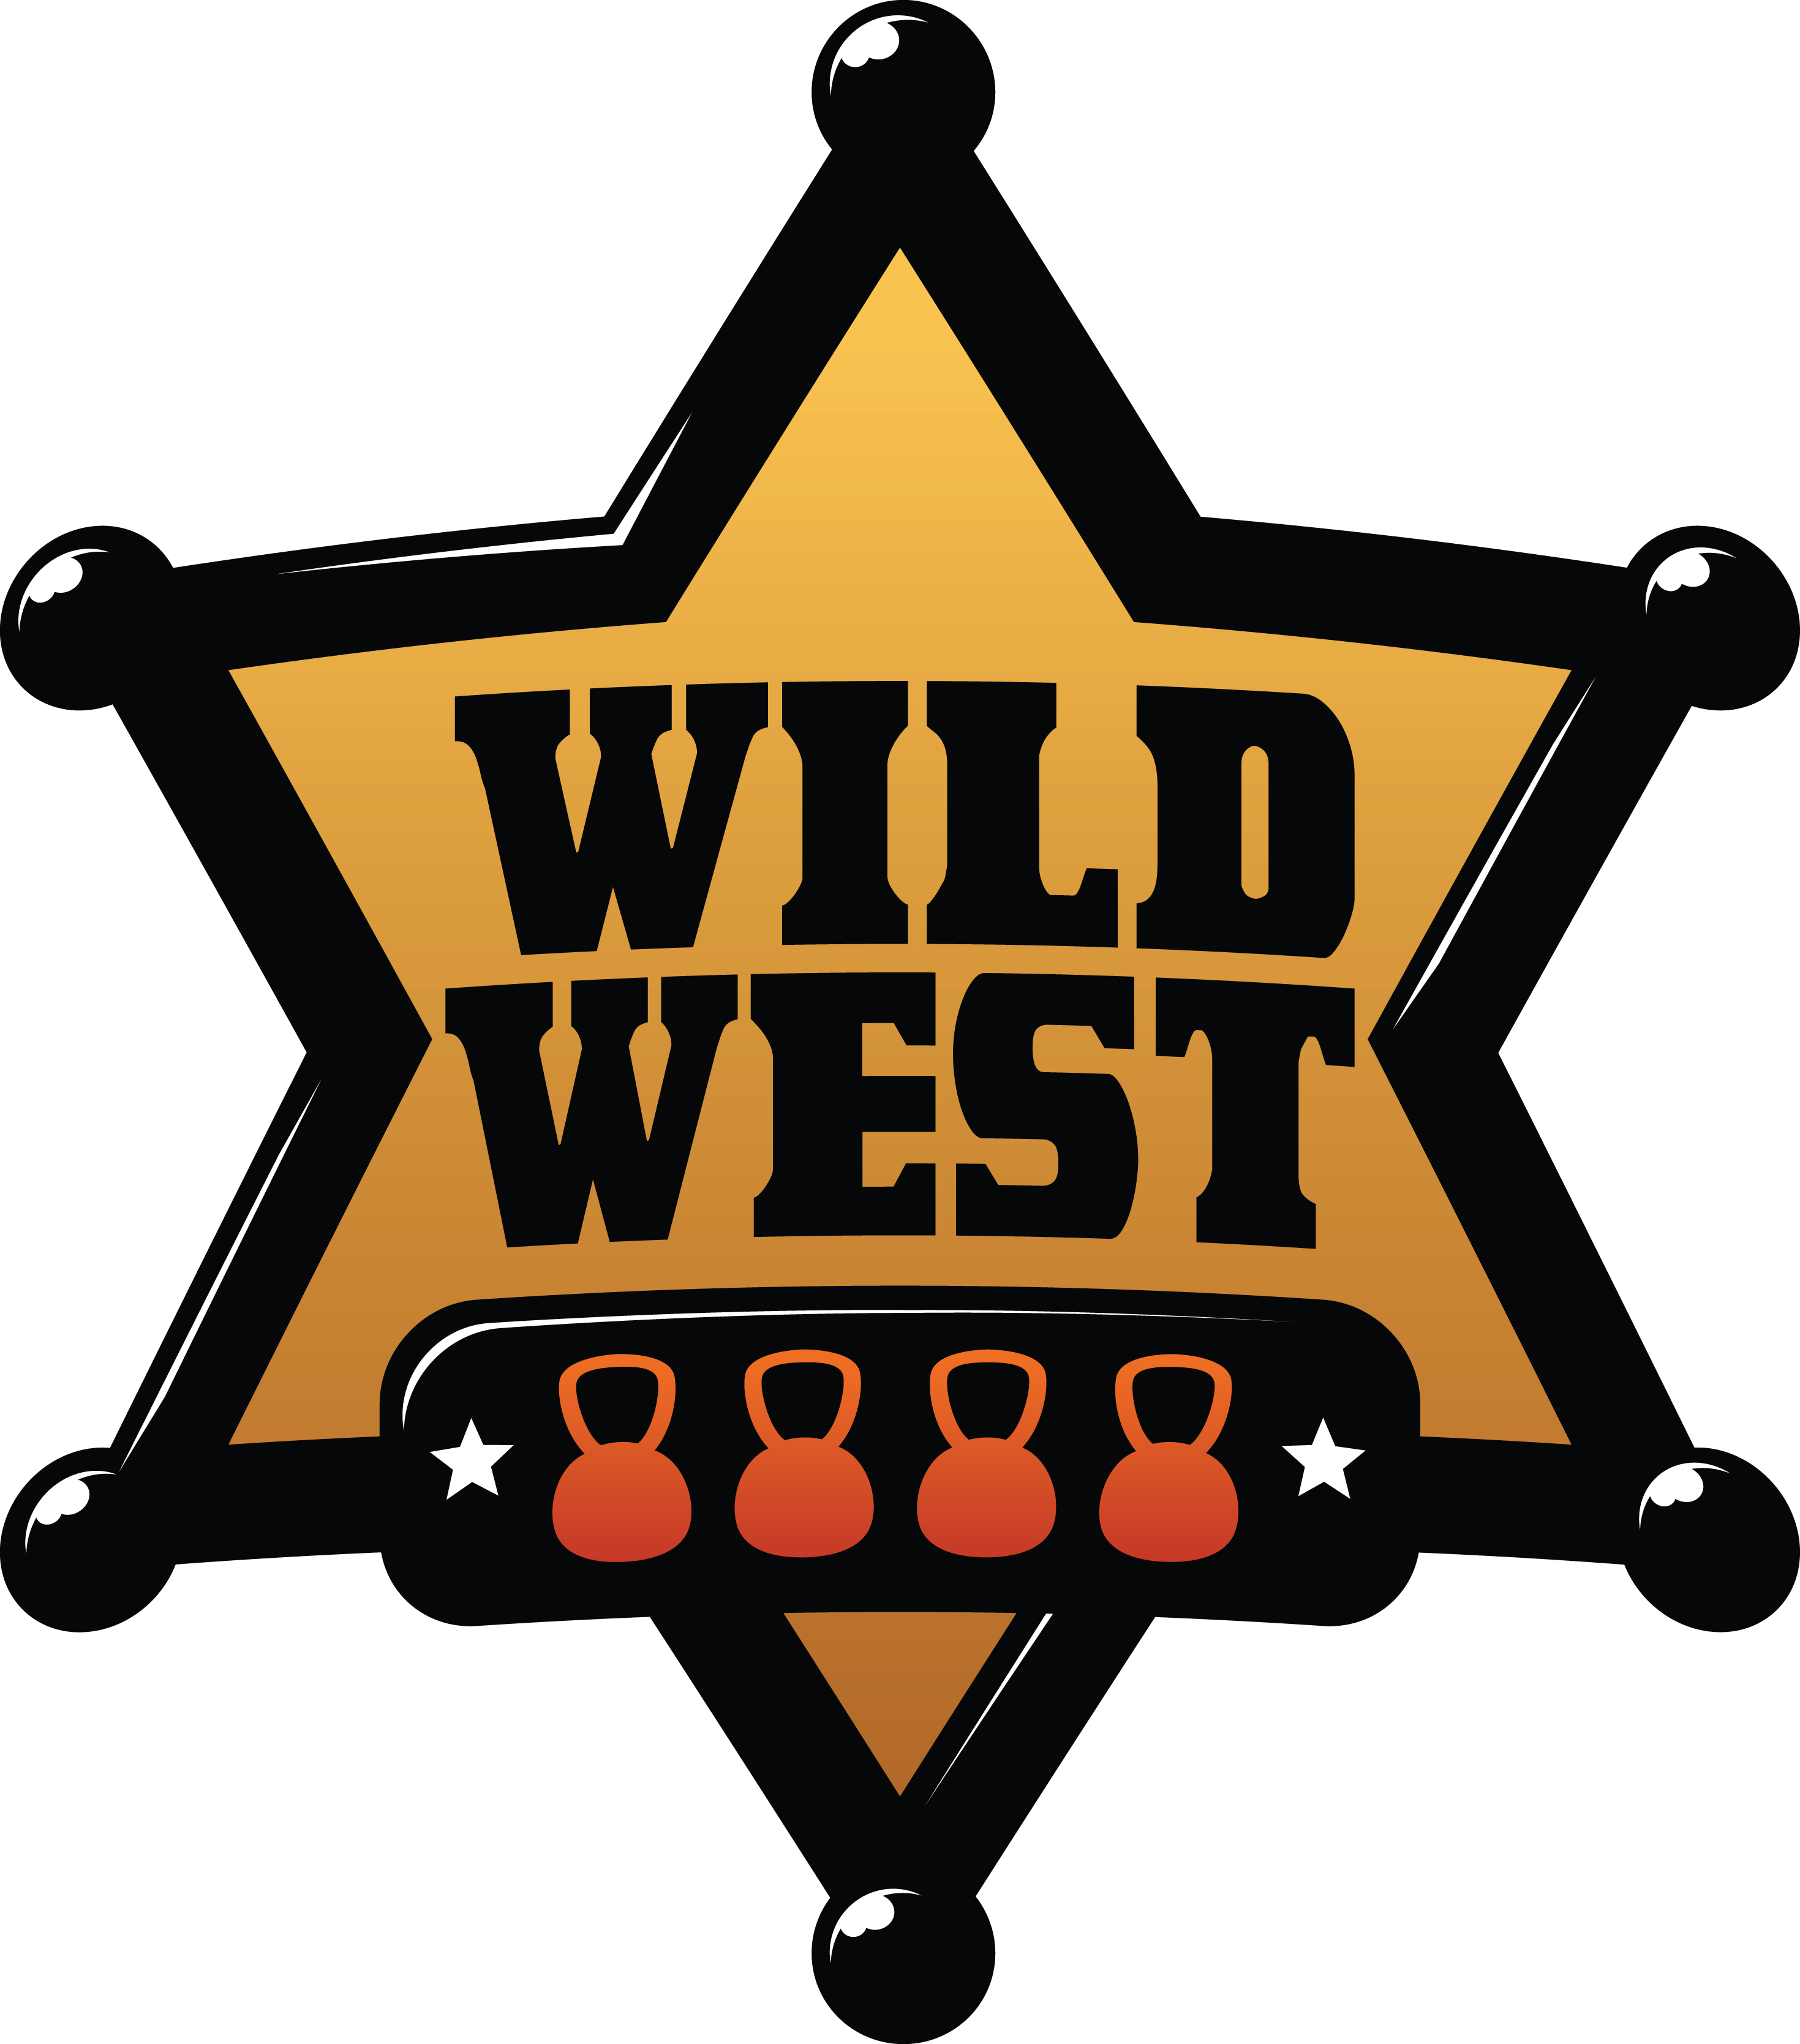 Wild West Png & Free Wild West.png Transparent Images #10229.